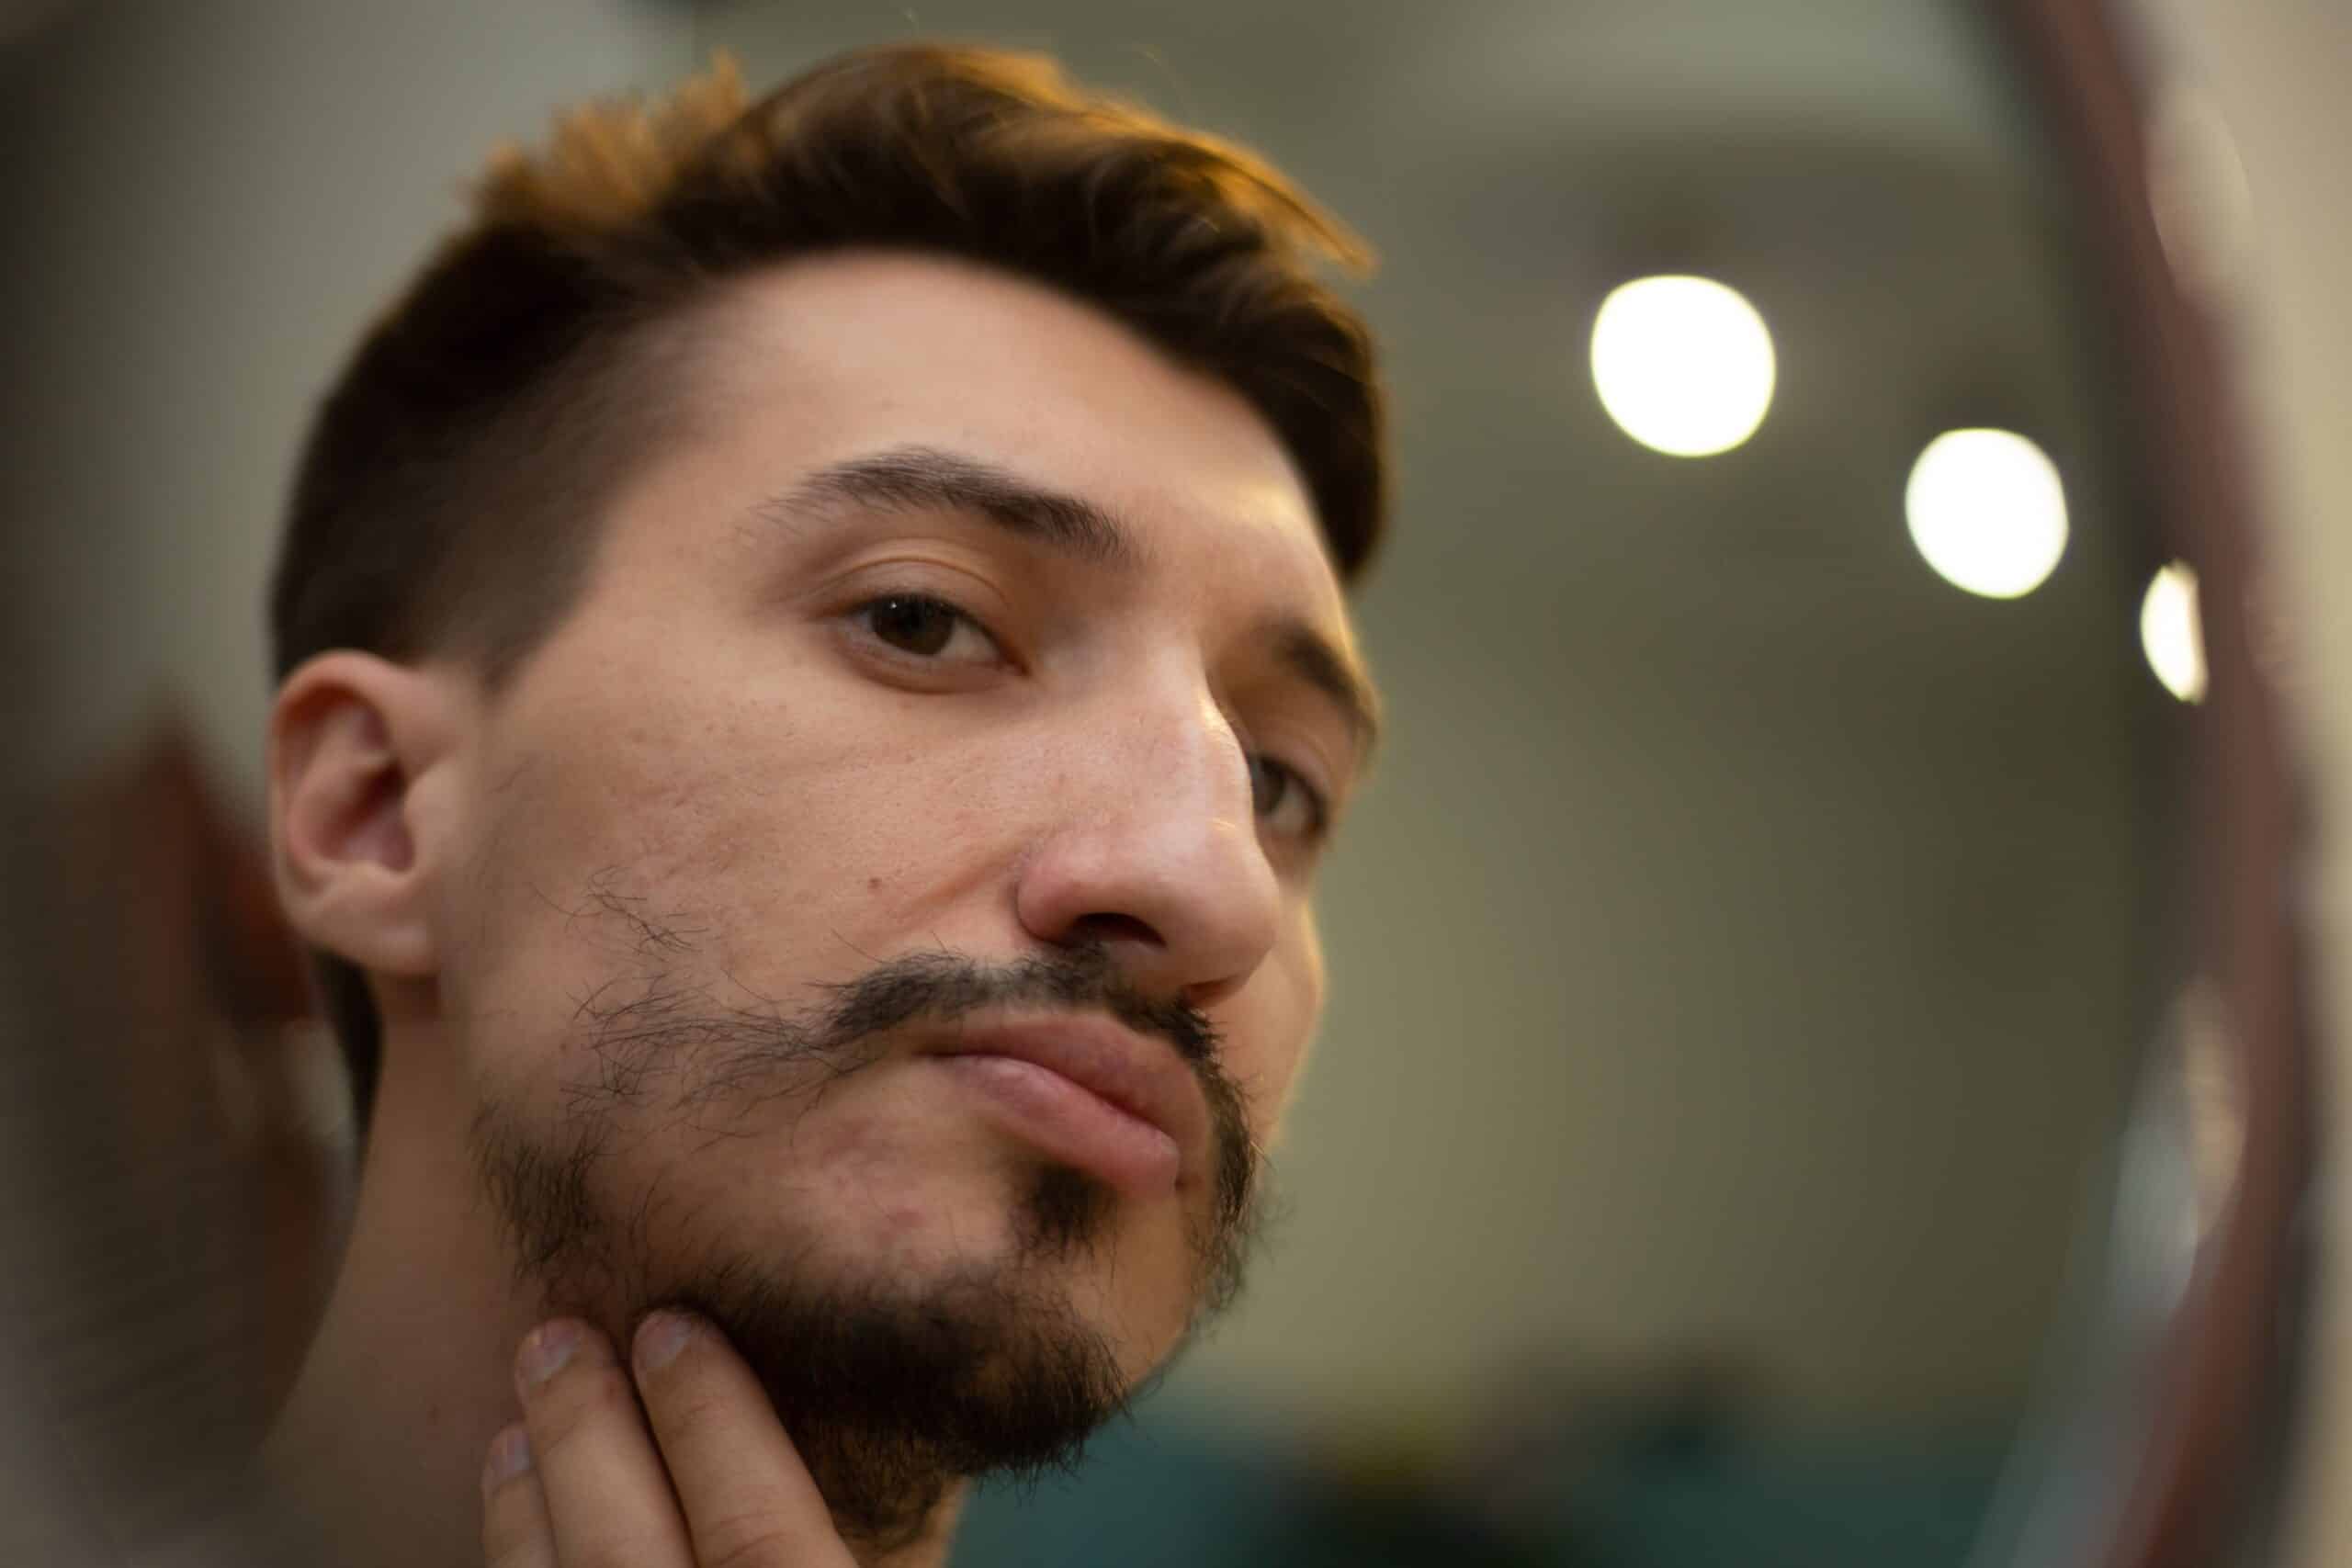 Man worried about his patchy beard growth, looking in a mirror